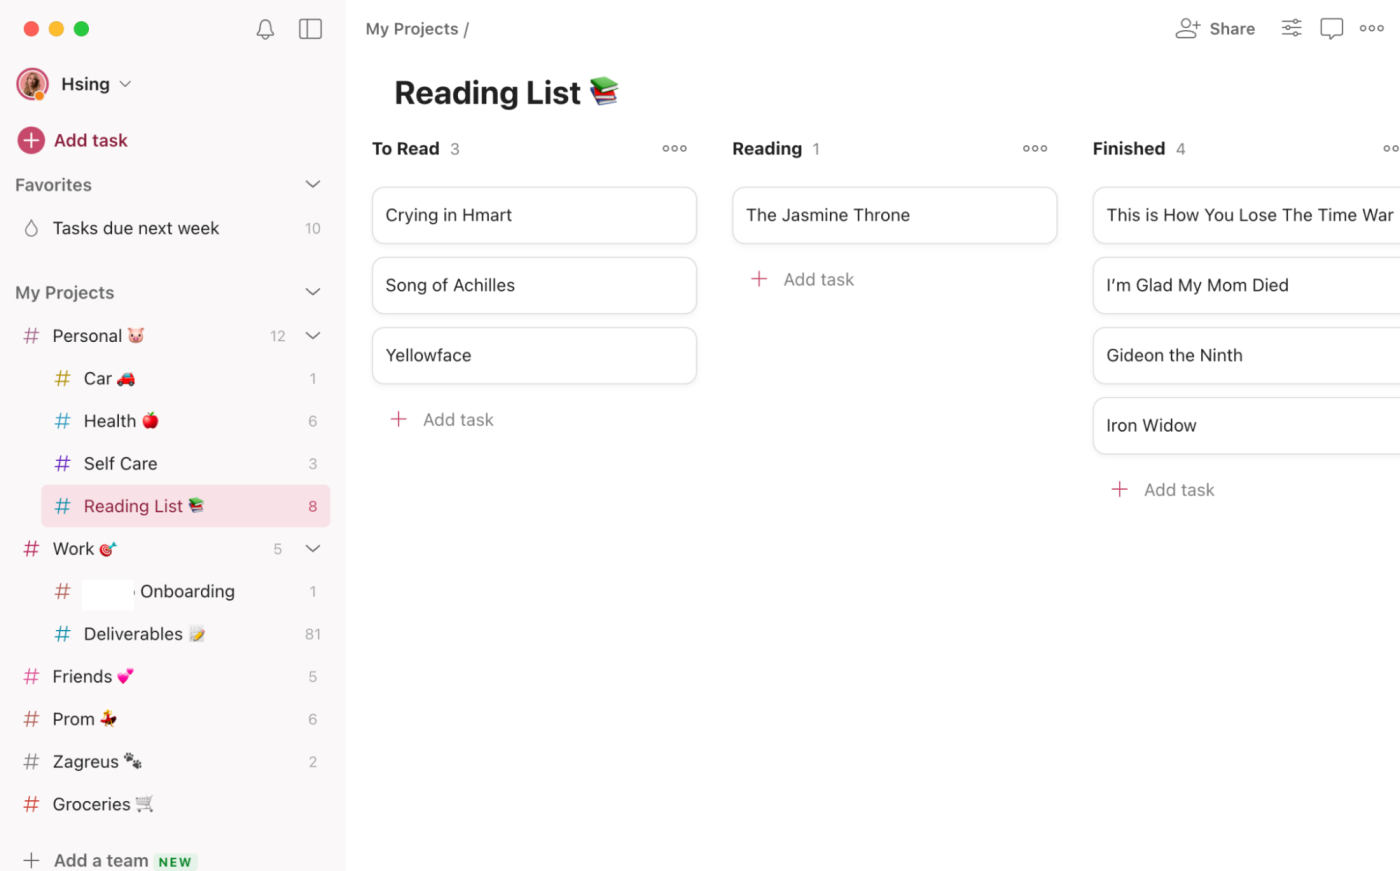 Subprojects in Todoist